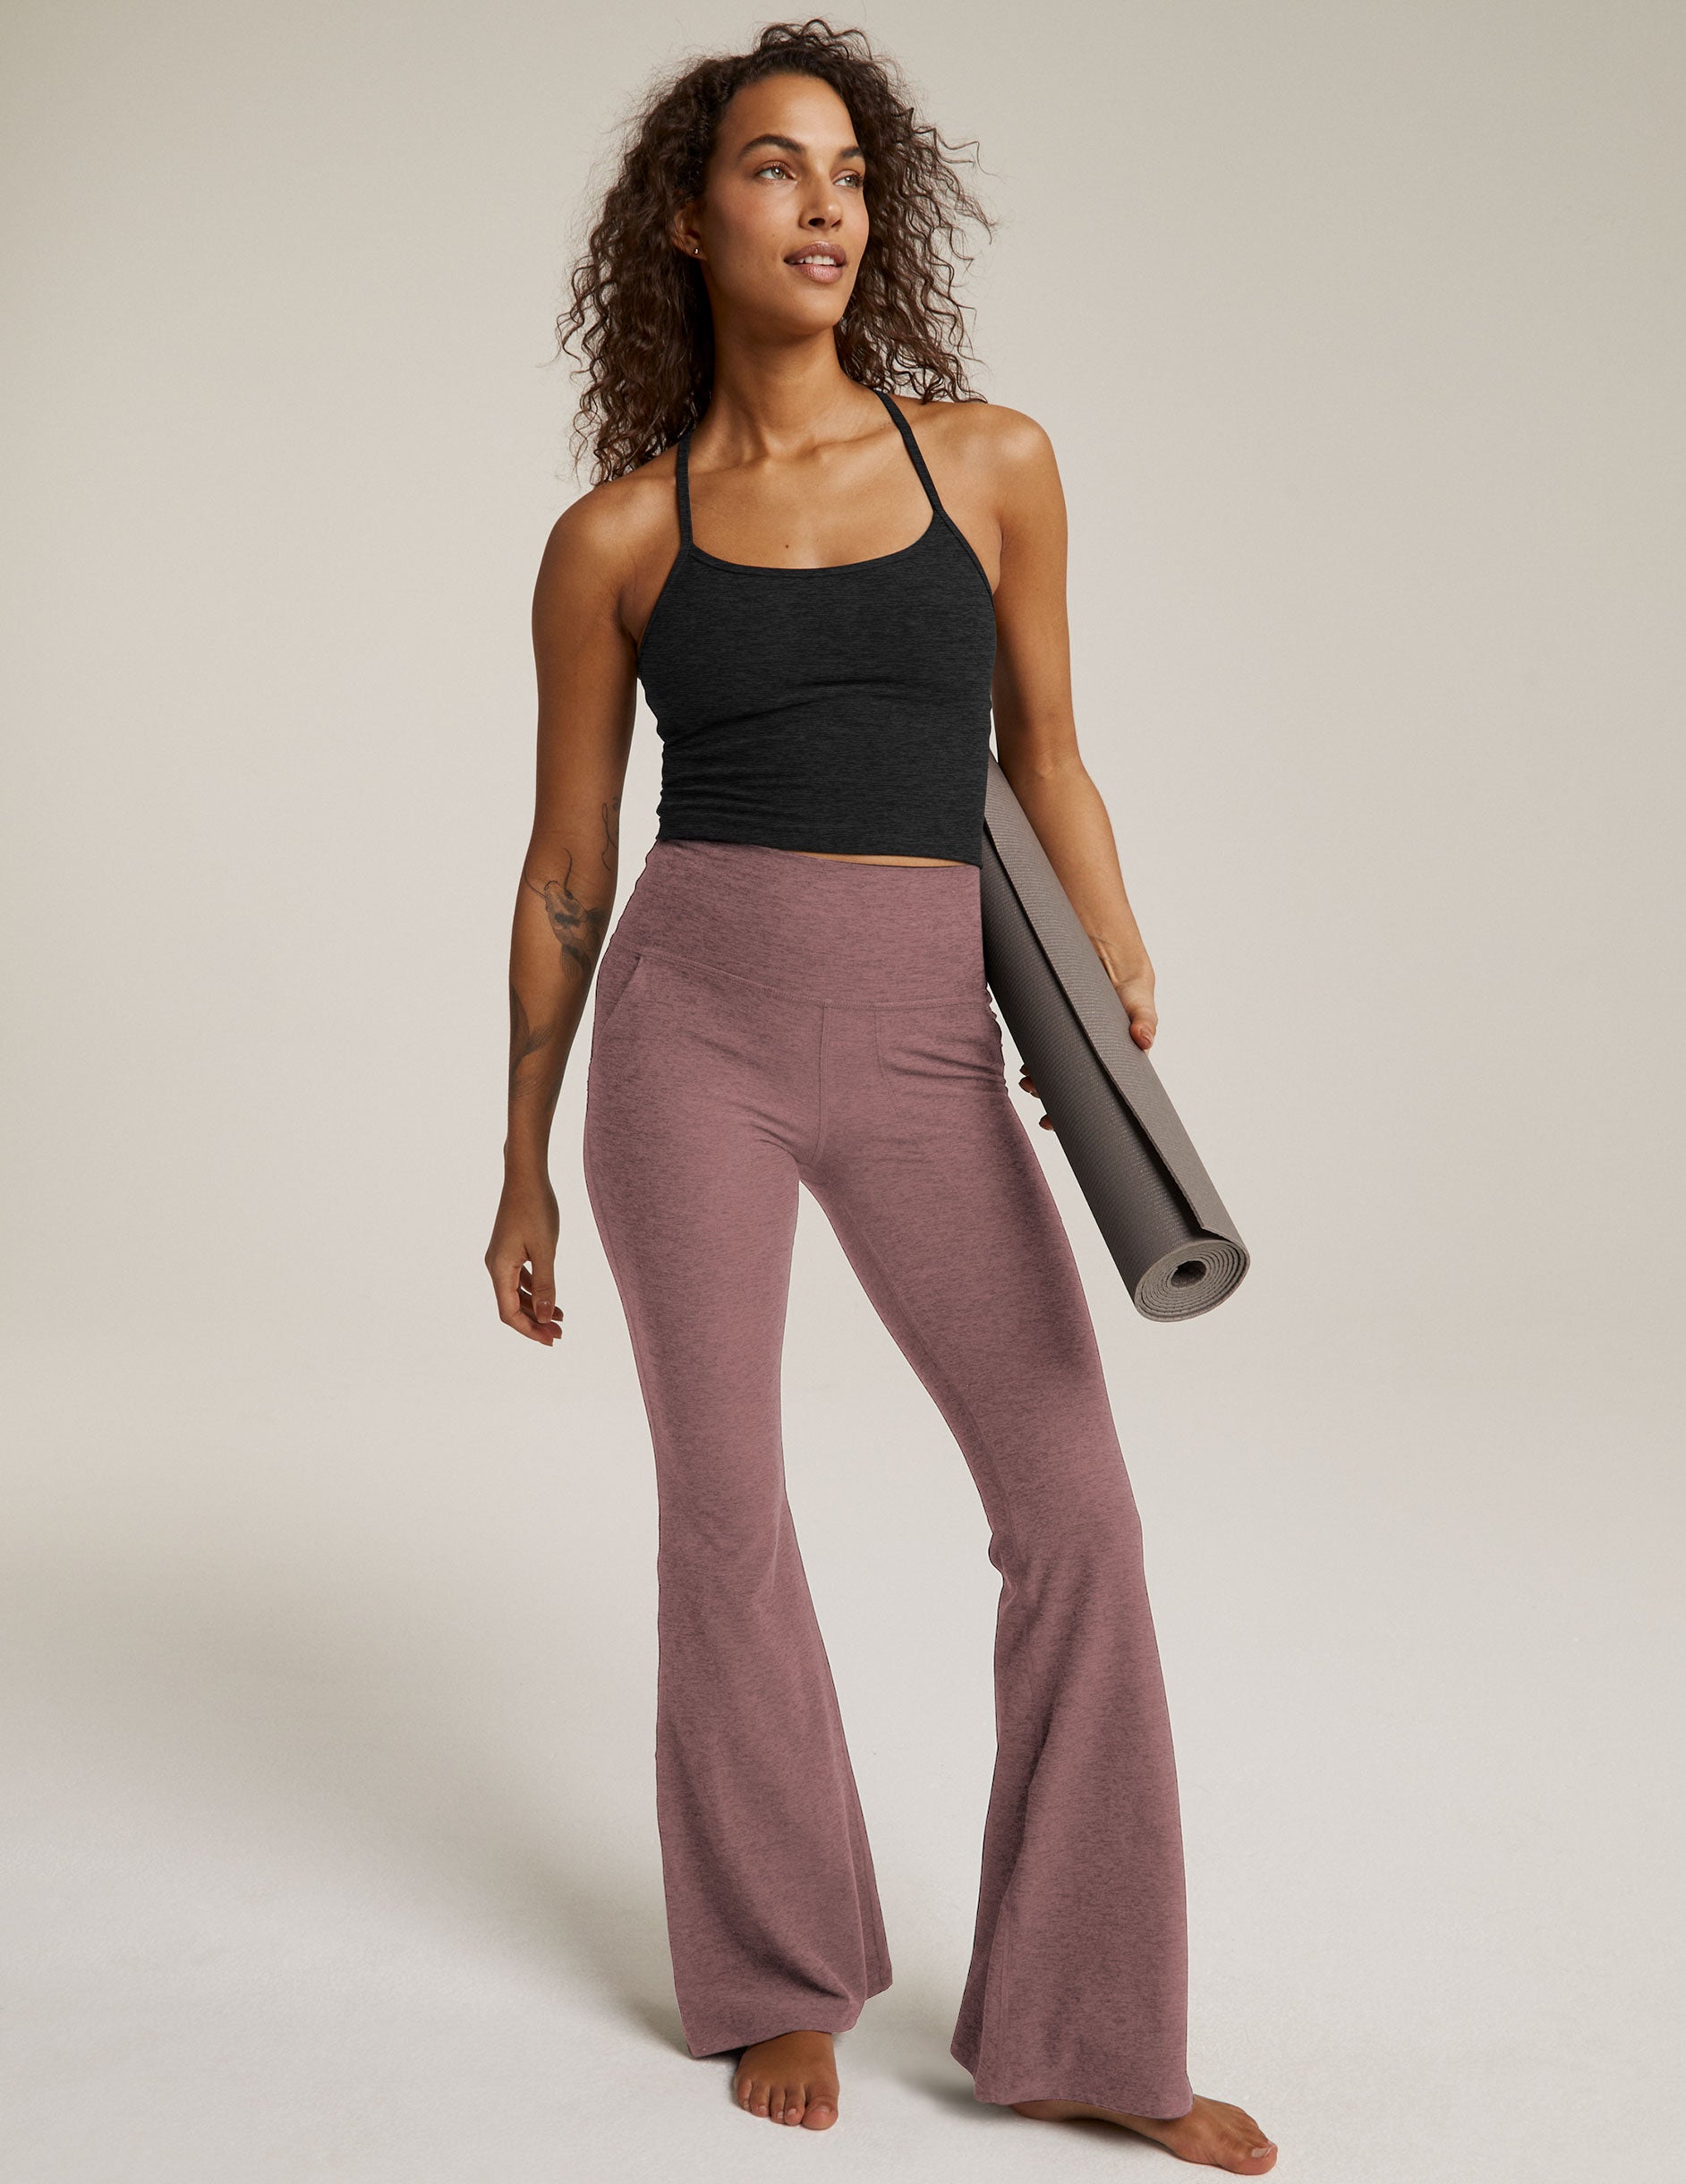 brown flare pant with pocket detail